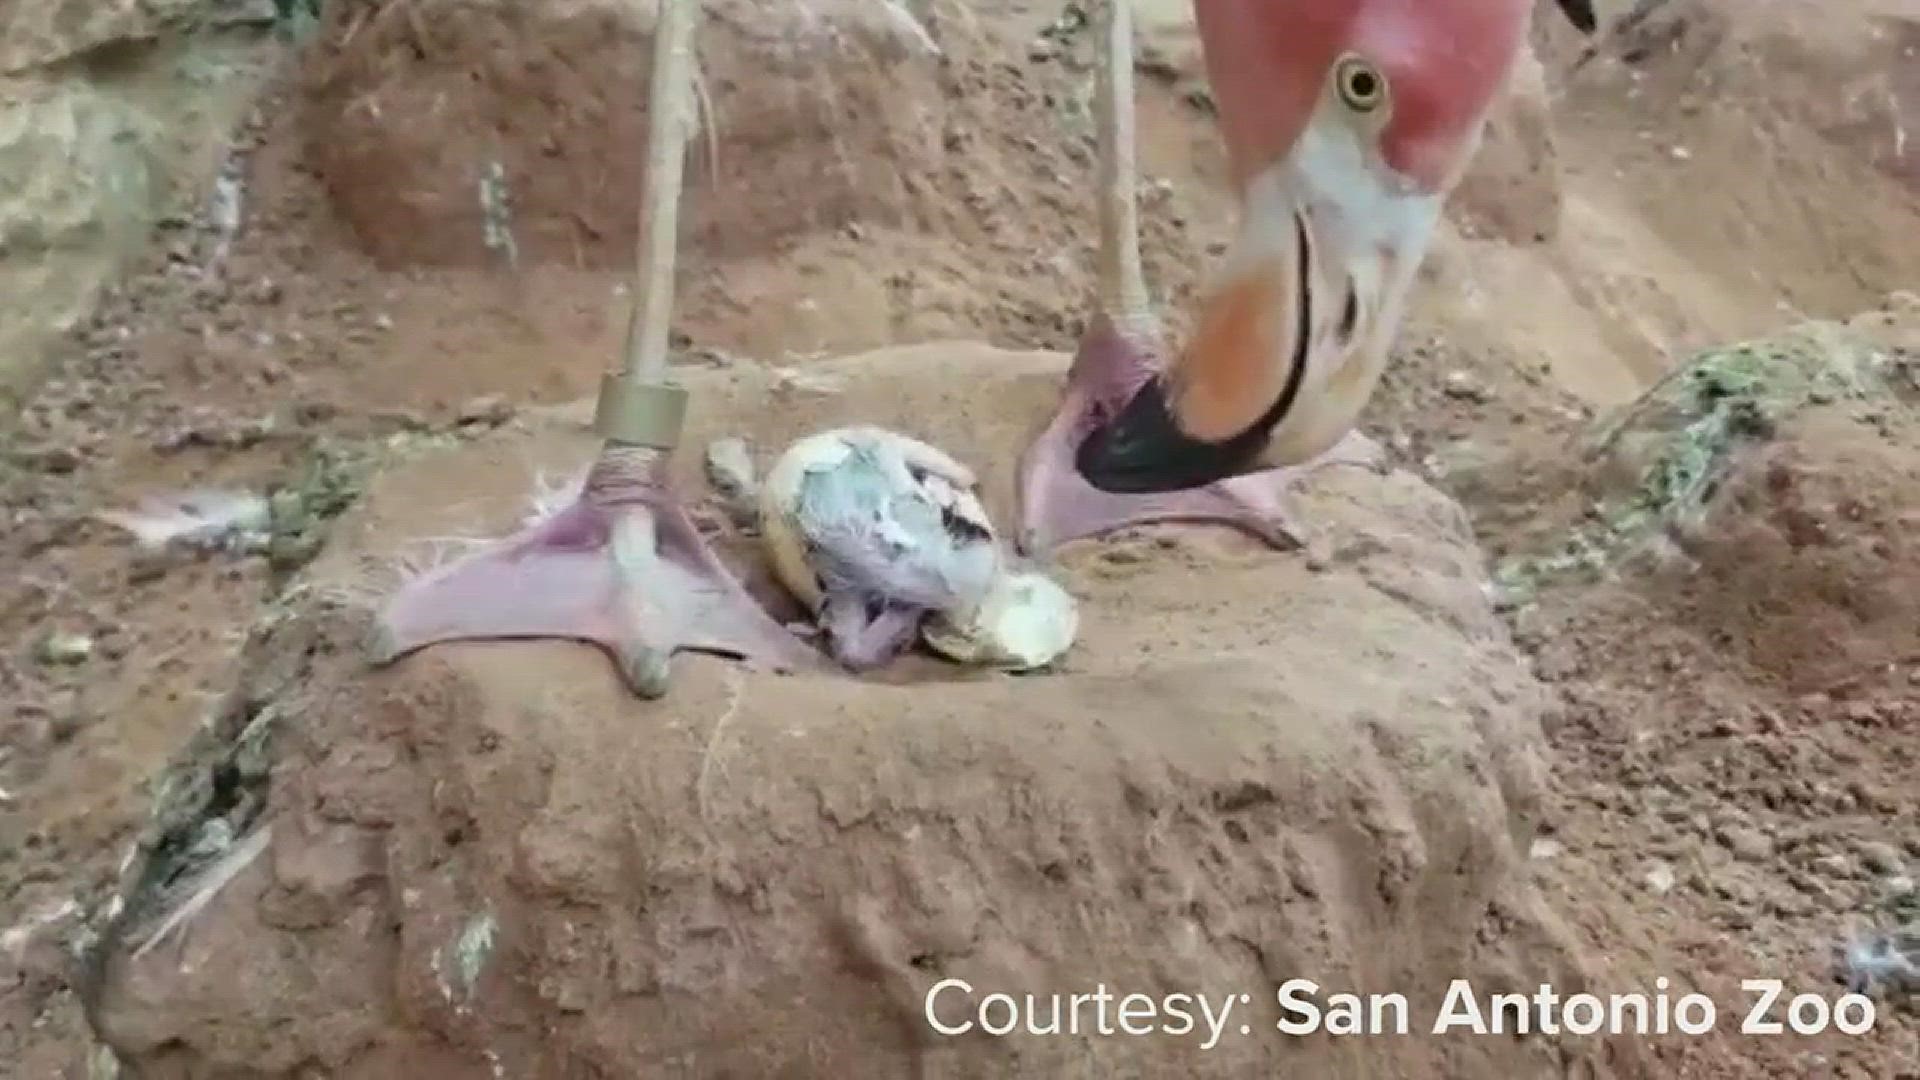 A baby flamingo recently hatched at the S.A. Zoo in time for Father's Day. (Video courtesy of San Antonio Zoo)